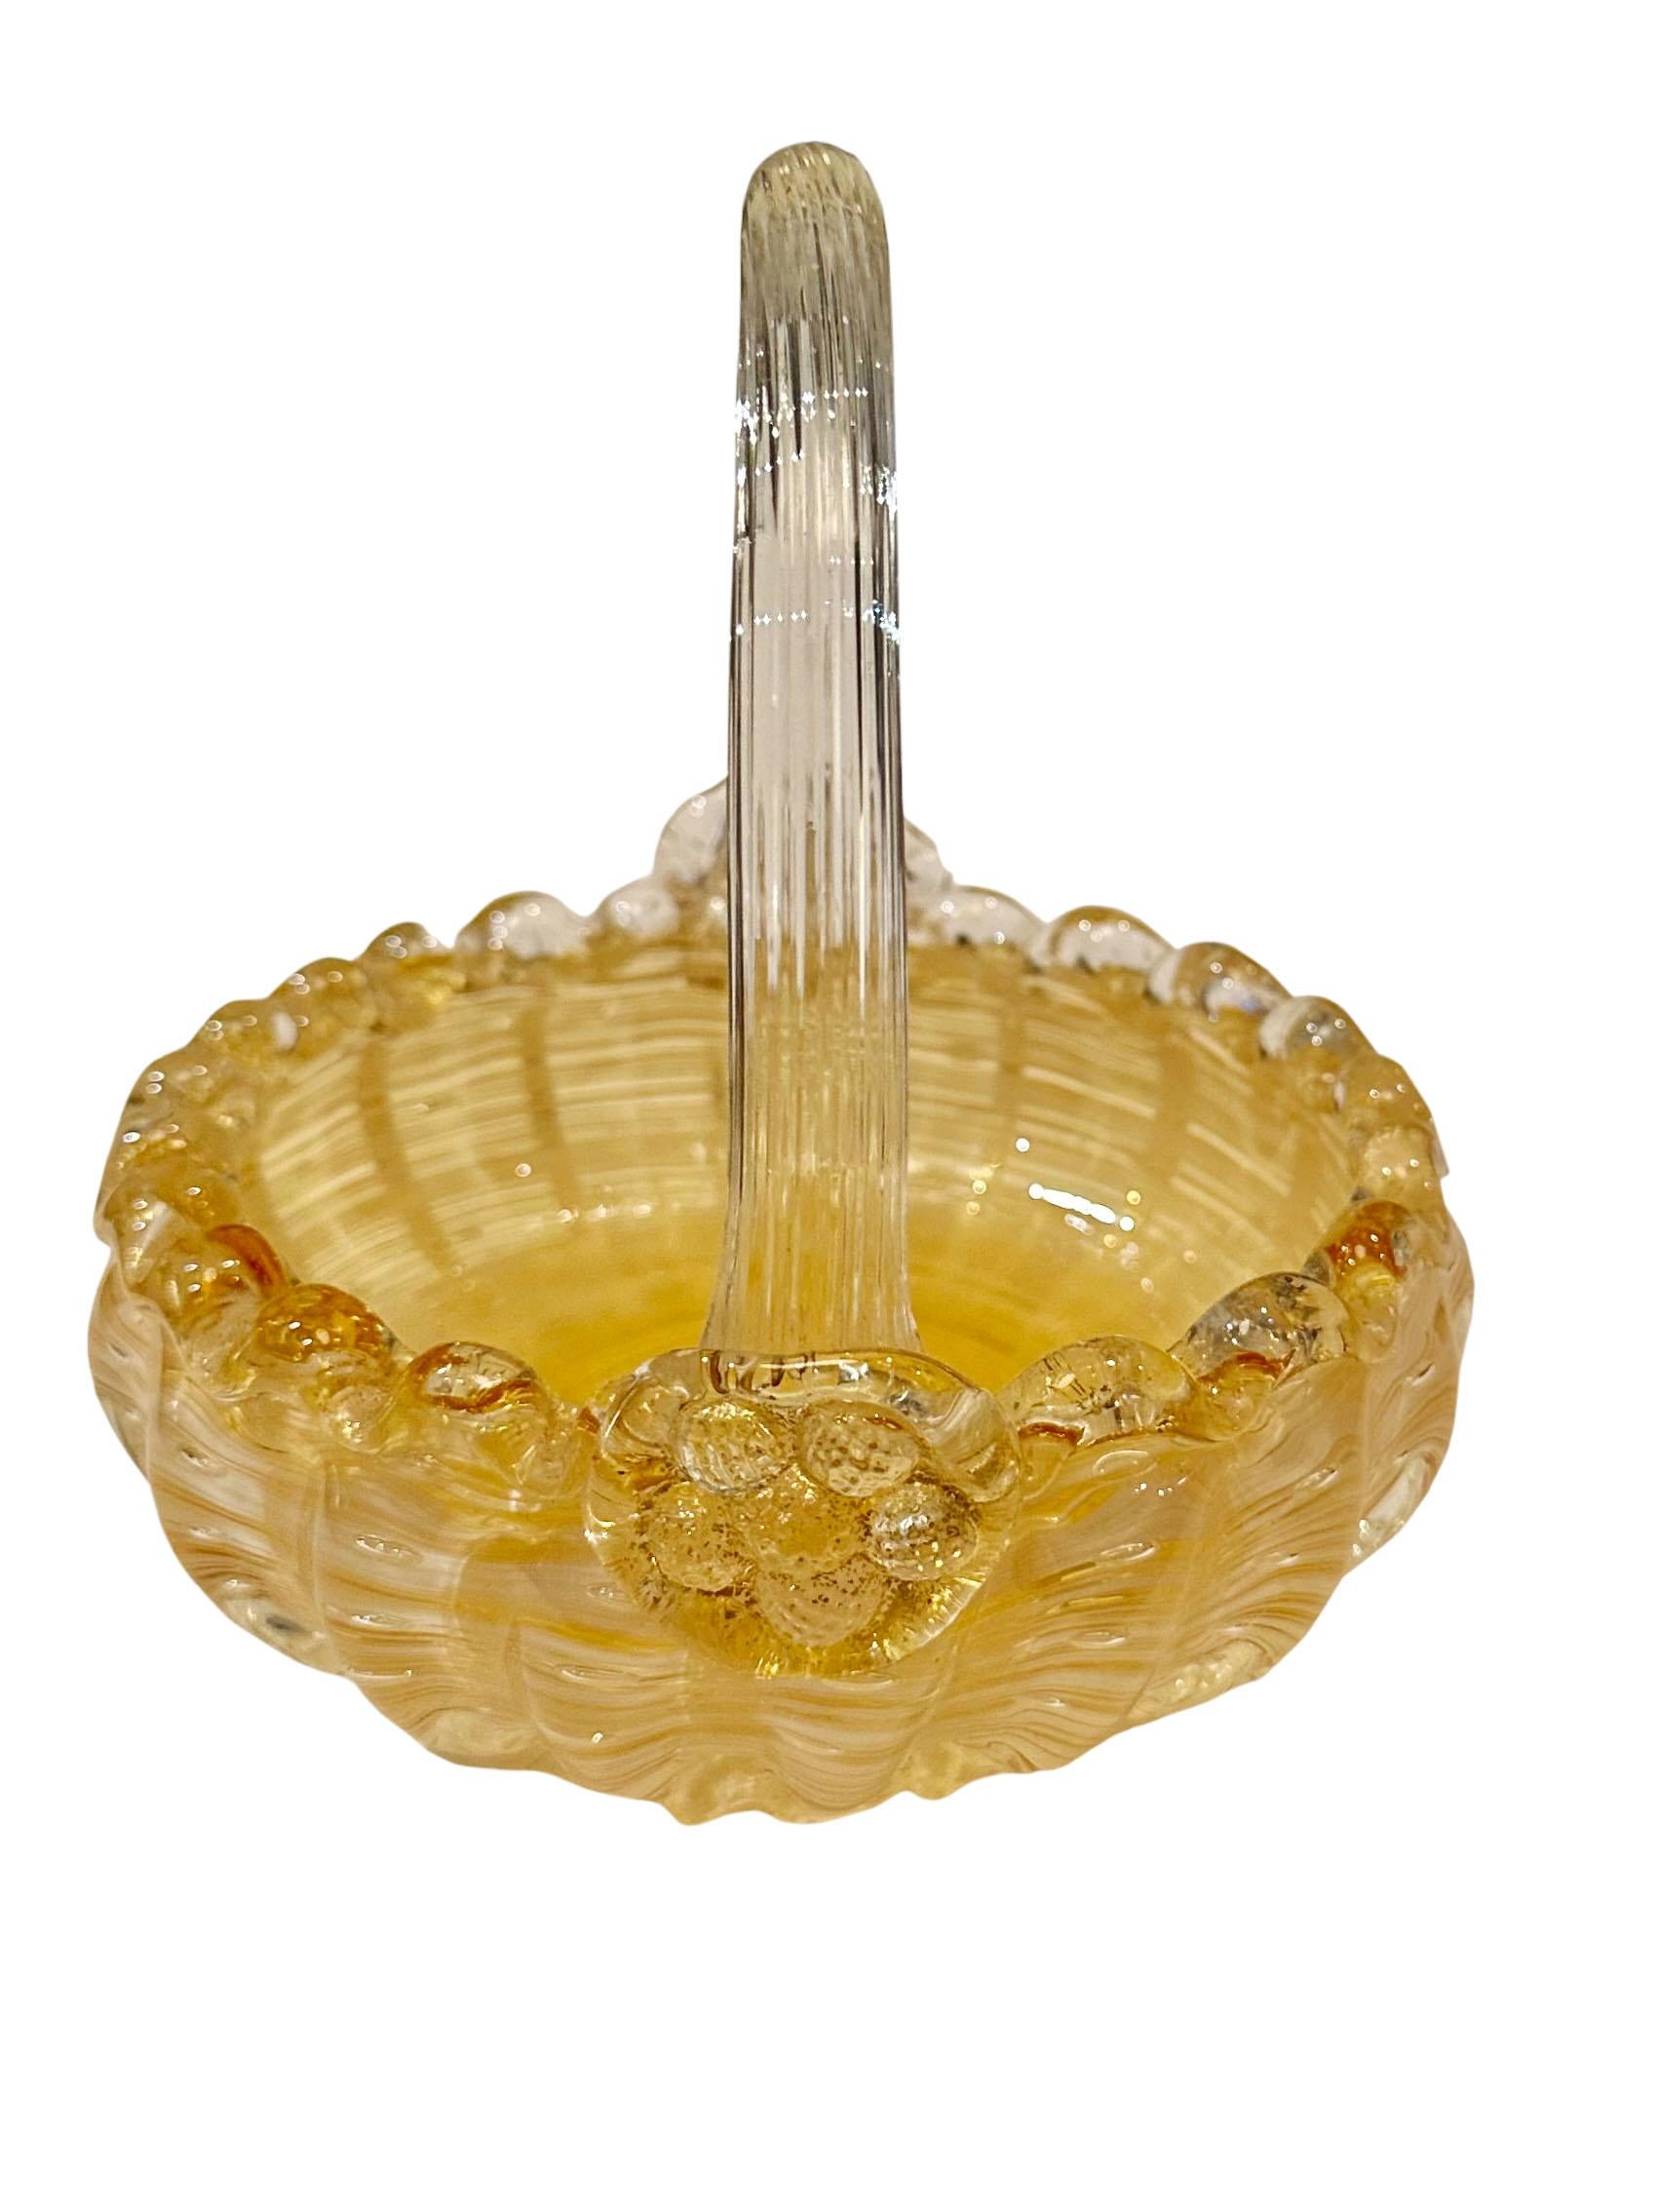 Murano glass basket candy dish. Cinched at the edges to make a ruffled edge. Beautiful yellow with a transparent handle. This will be sure to delight your guest. Circa 1950s, Italy.
